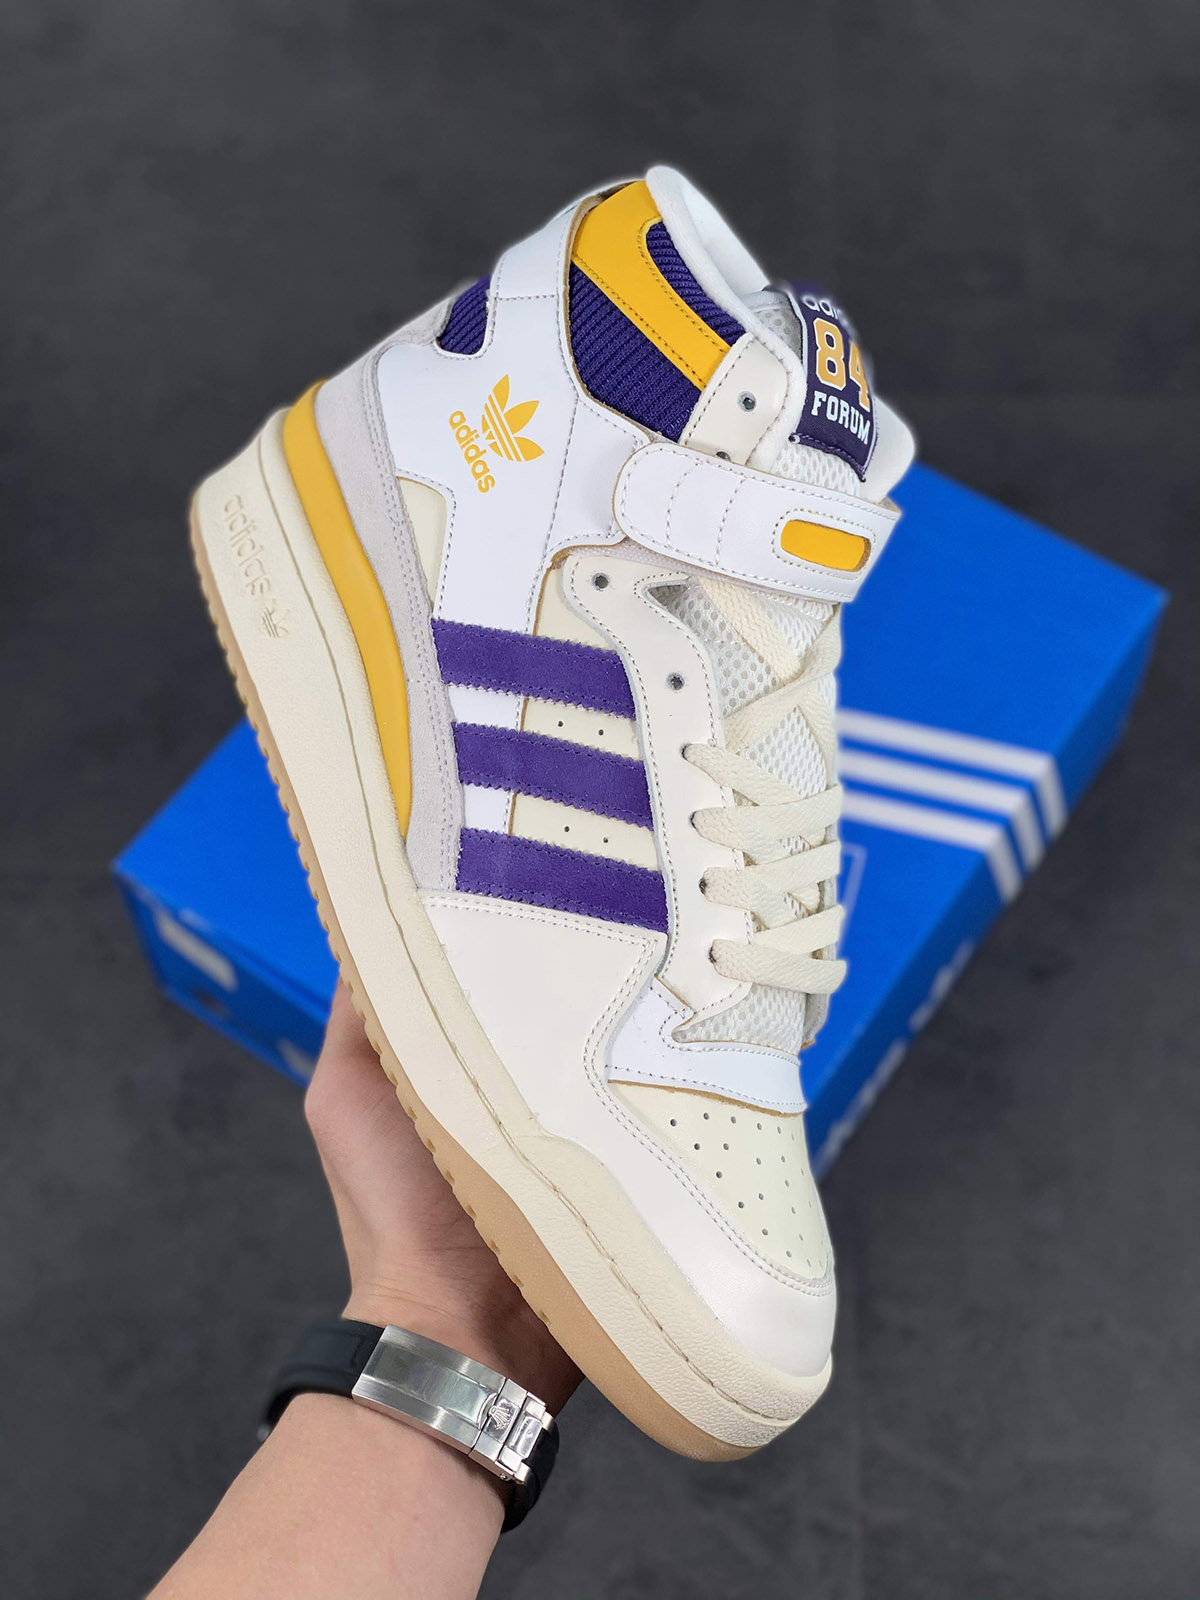 Adidas Forum Lo 84 LAKERS for Sale in Torrance, CA - OfferUp